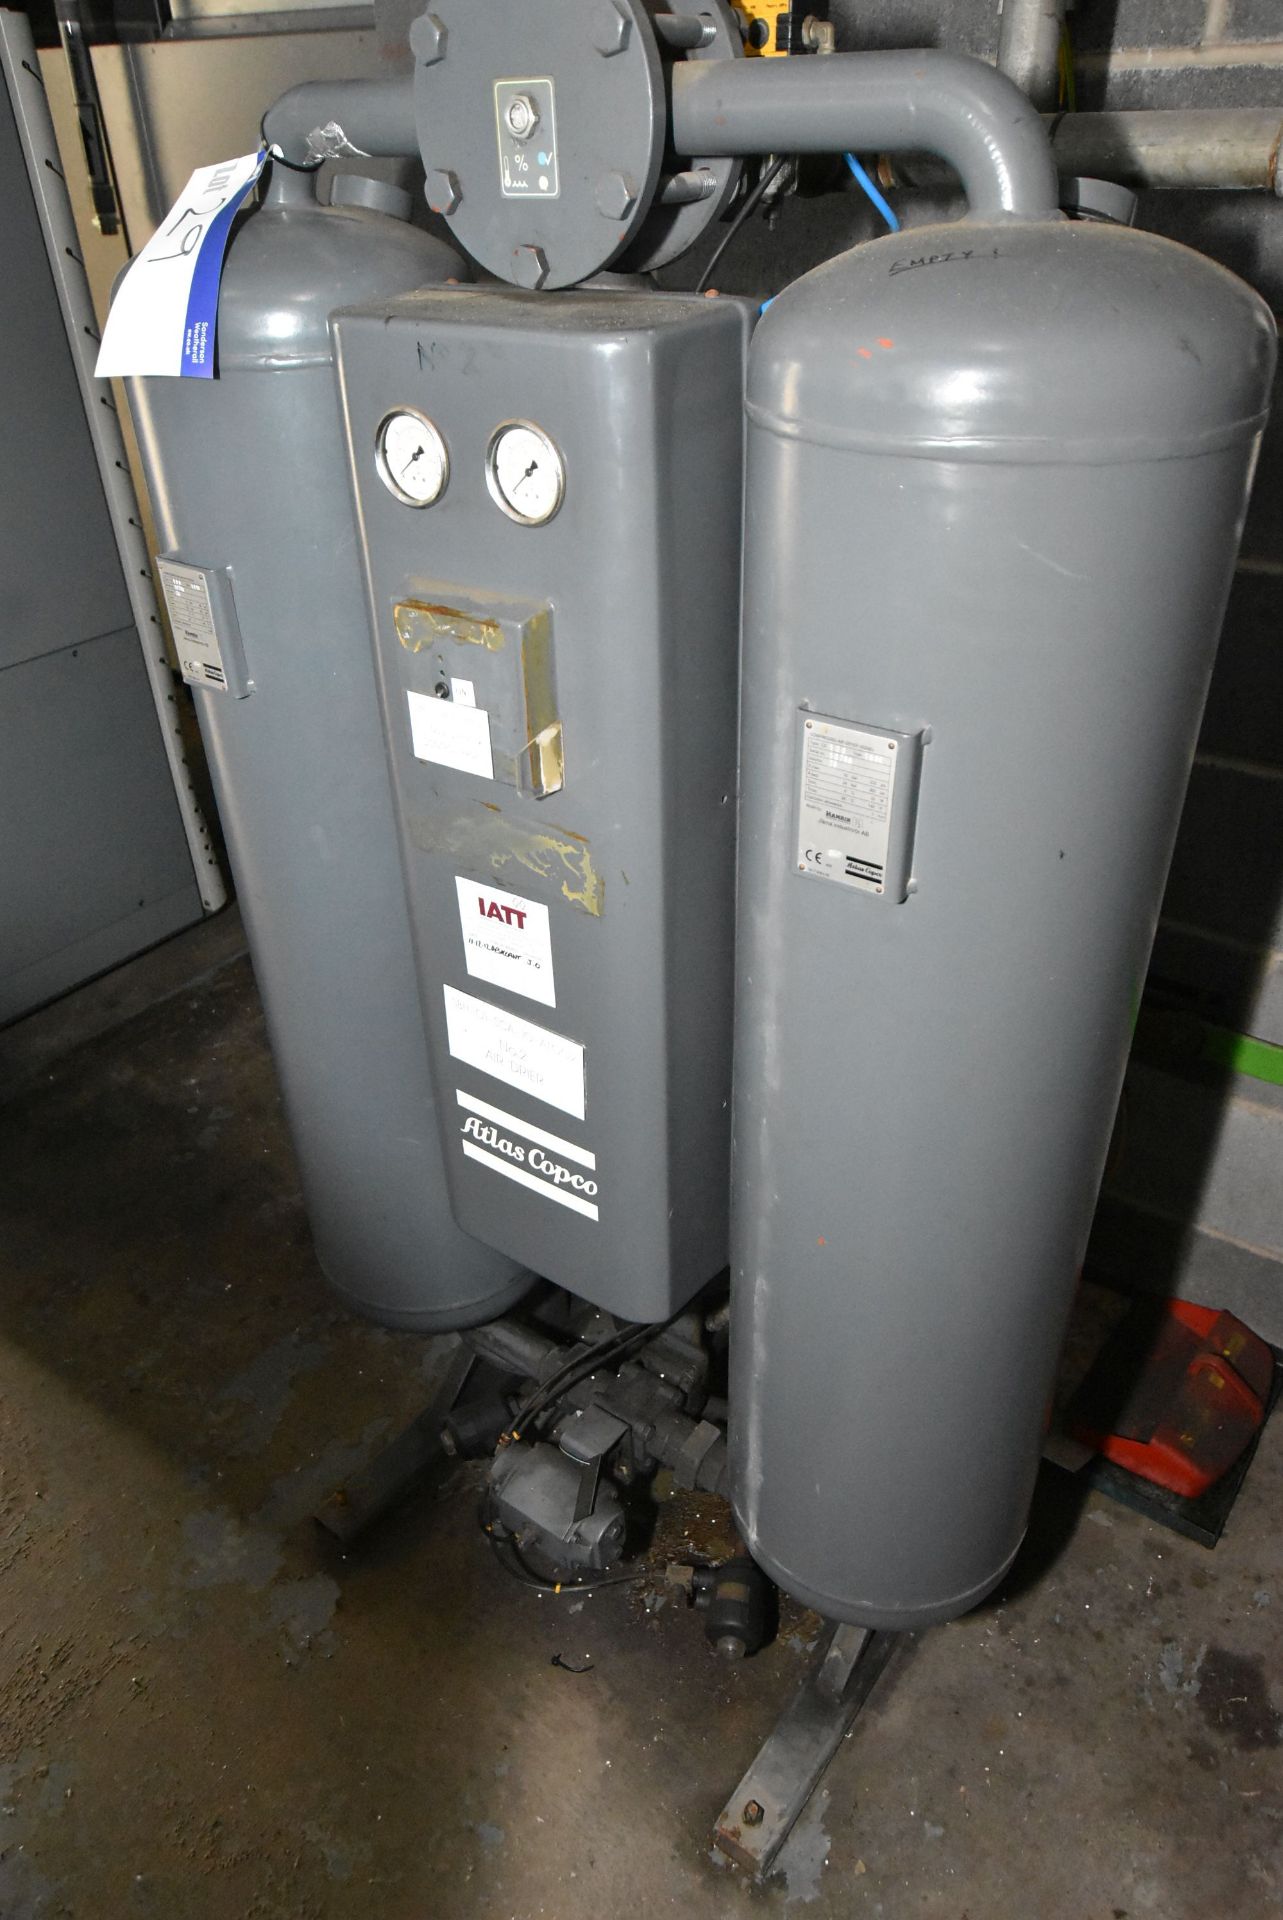 Atlas Copco Twin CD 100 Air Dryer (no. 2 dryer), serial no. 10768/9, year of manufacture 1998, - Image 3 of 7